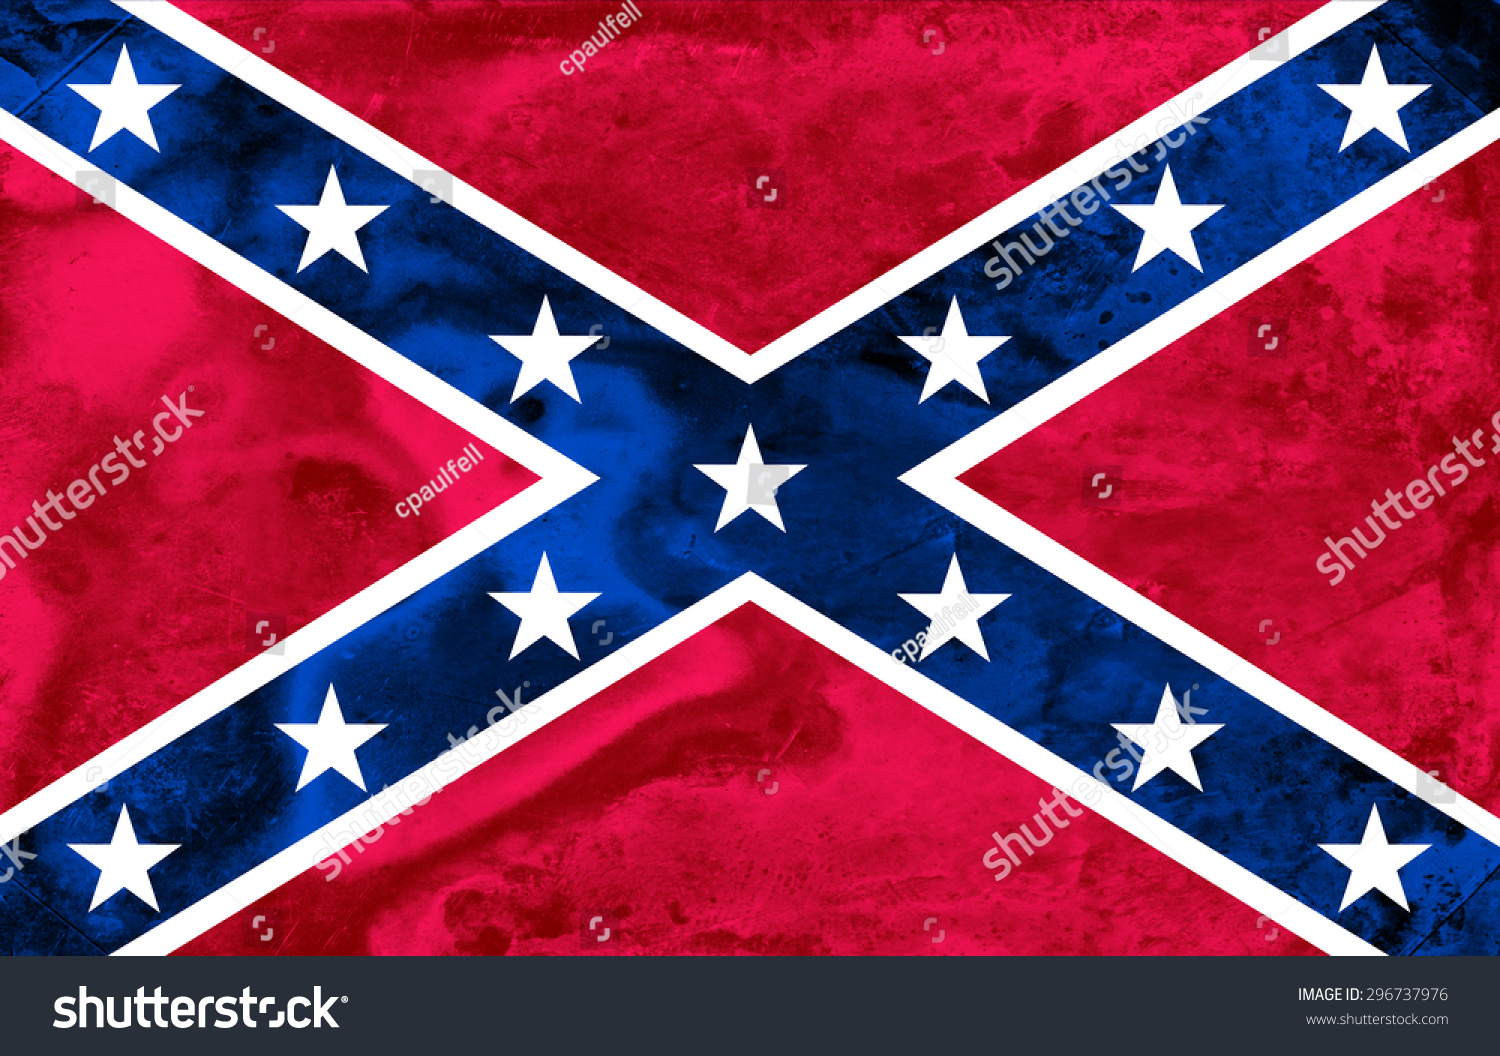 Confederate Flag In Grunge Style Stock Photo 296737976 : Shutterstock